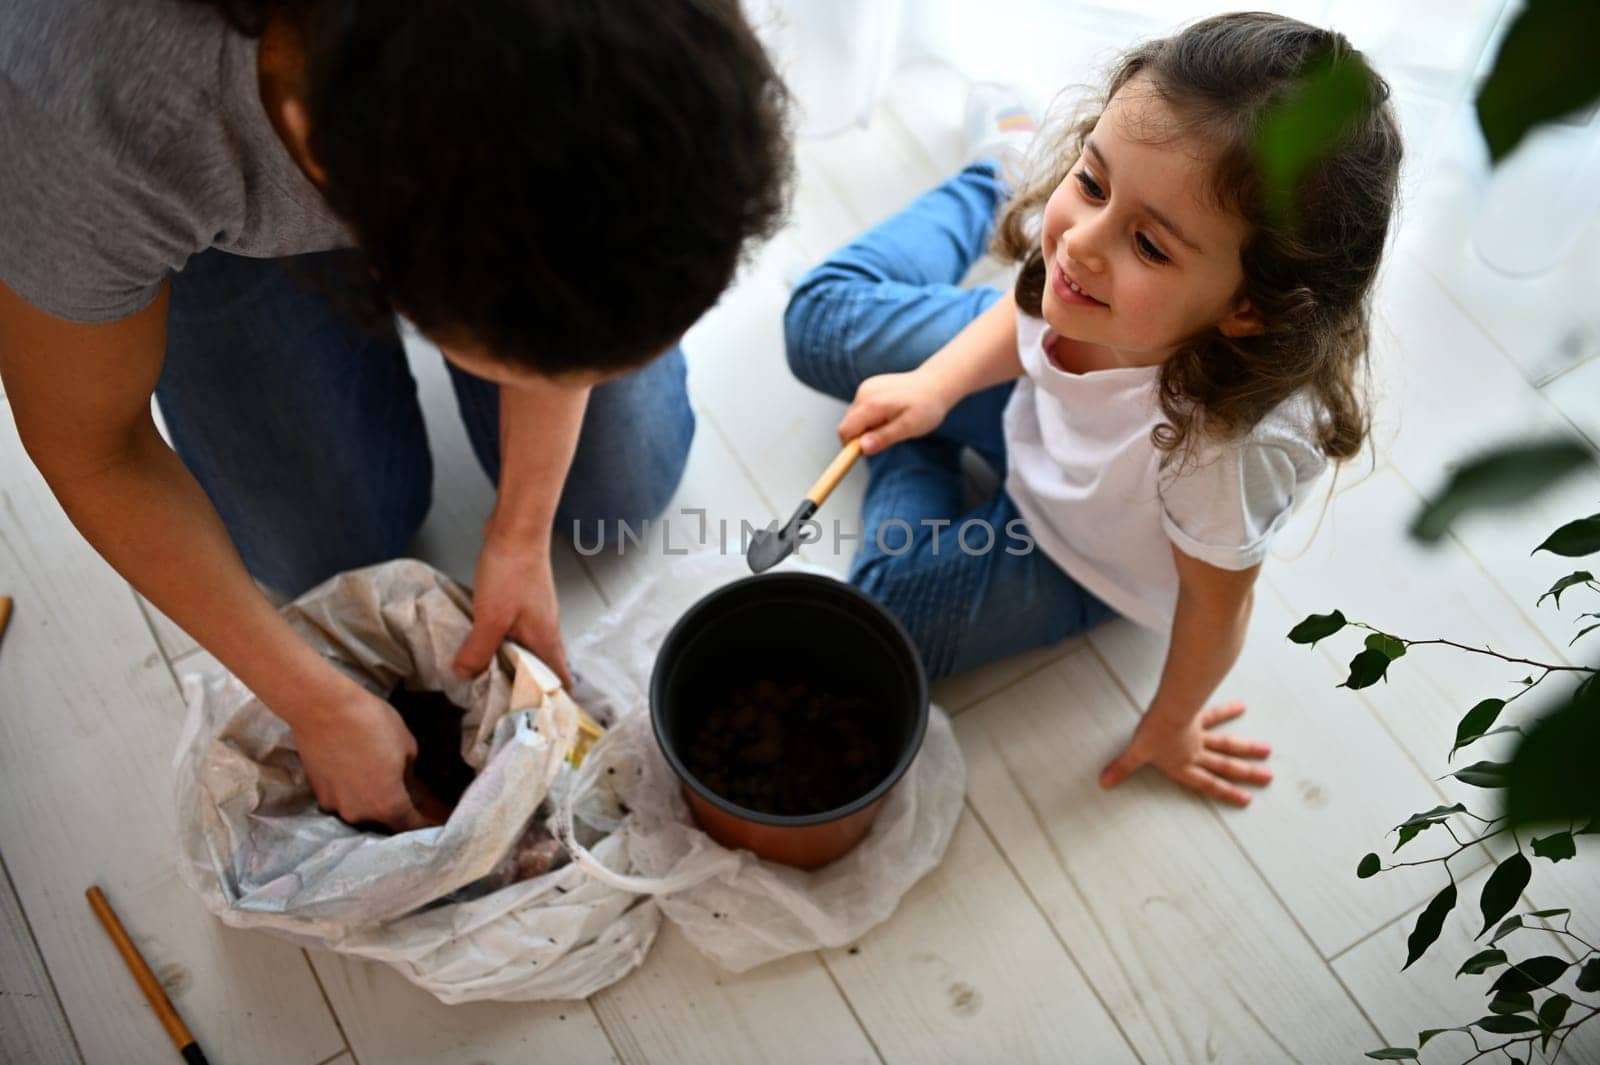 Little girl sitting on floor with garden shovel in her hand, smiling to her mom working with soil white repotting plants by artgf